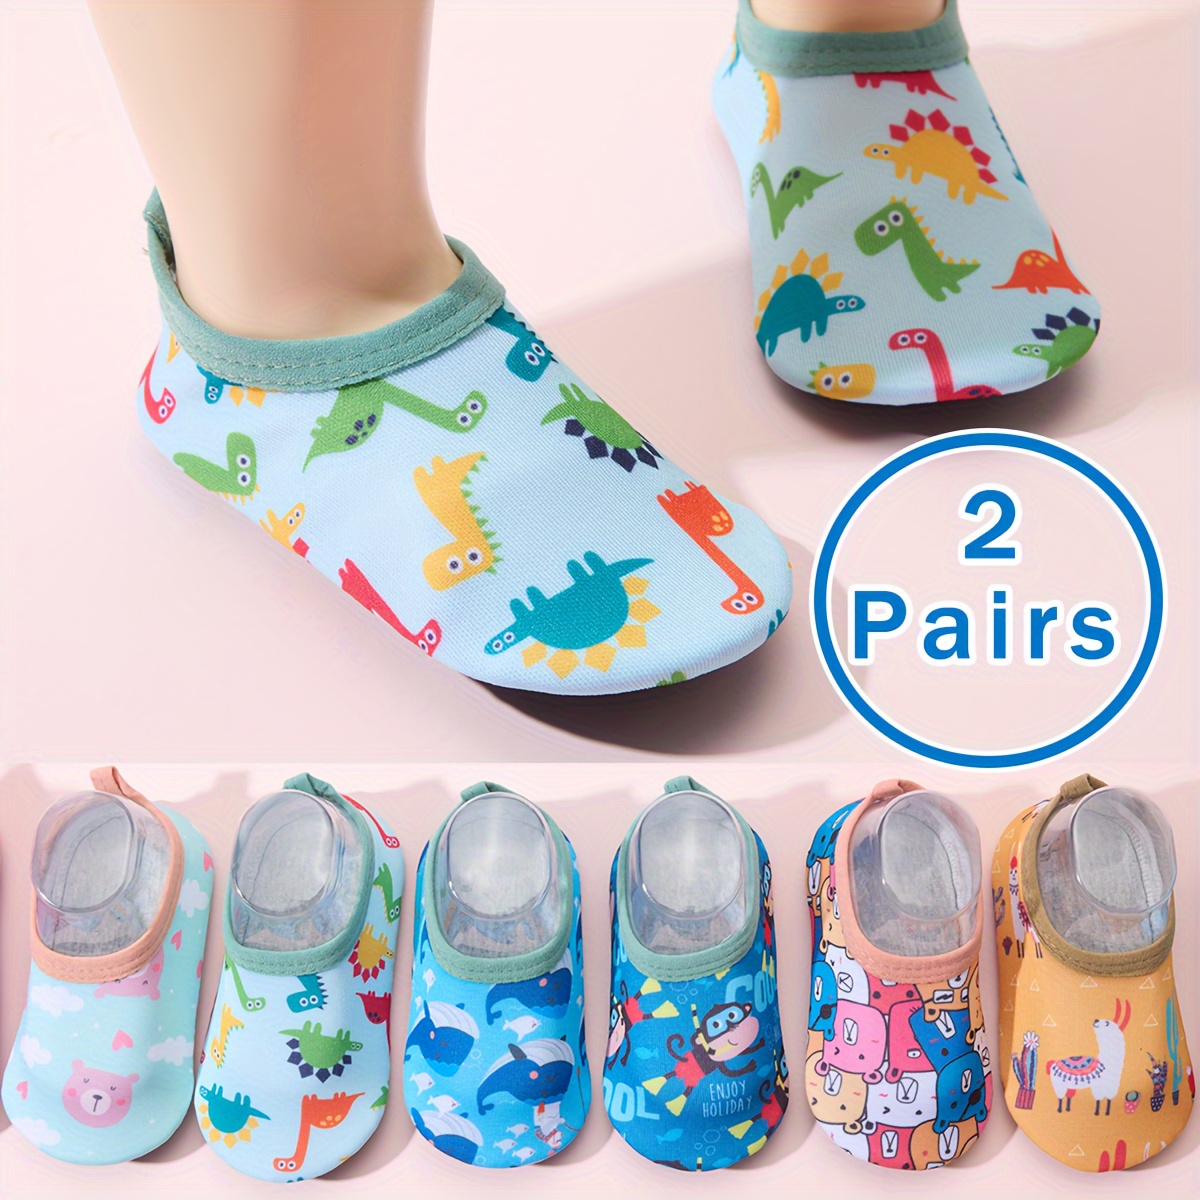 

2 Pairs Of Baby Girl's Non Slip Floor Socks, Comfy Breathable Cute Pattern Sock Shoes For Babies Indoor Activities